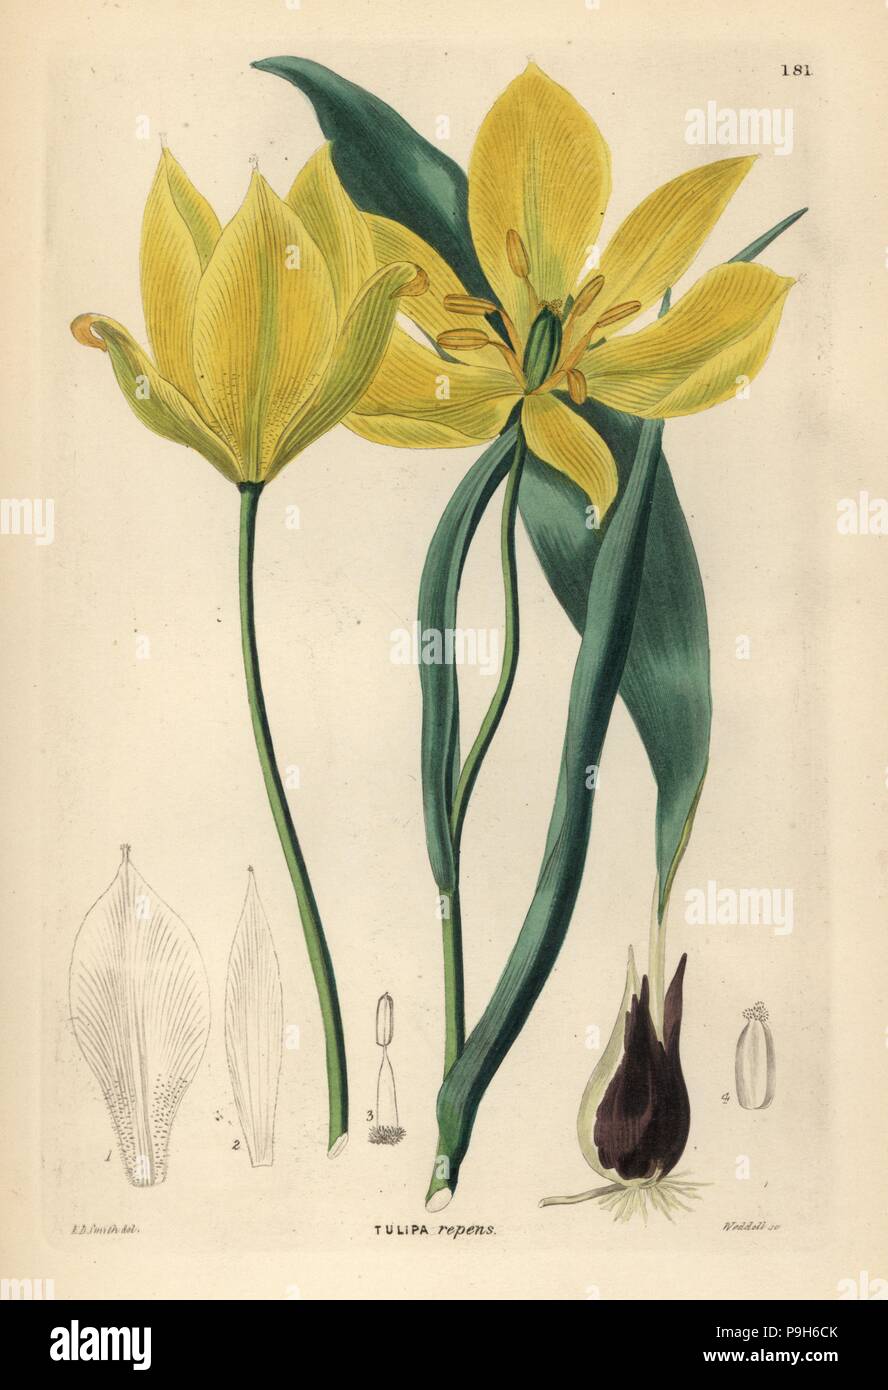 Didier's tulip or garden tulip, Tulipa gesneriana (Creeping-rooted tulip, Tulipa repens). Handcoloured copperplate engraving by Weddell after Edwin Dalton Smith from John Lindley and Robert Sweet's Ornamental Flower Garden and Shrubbery, G. Willis, London, 1854. Stock Photo